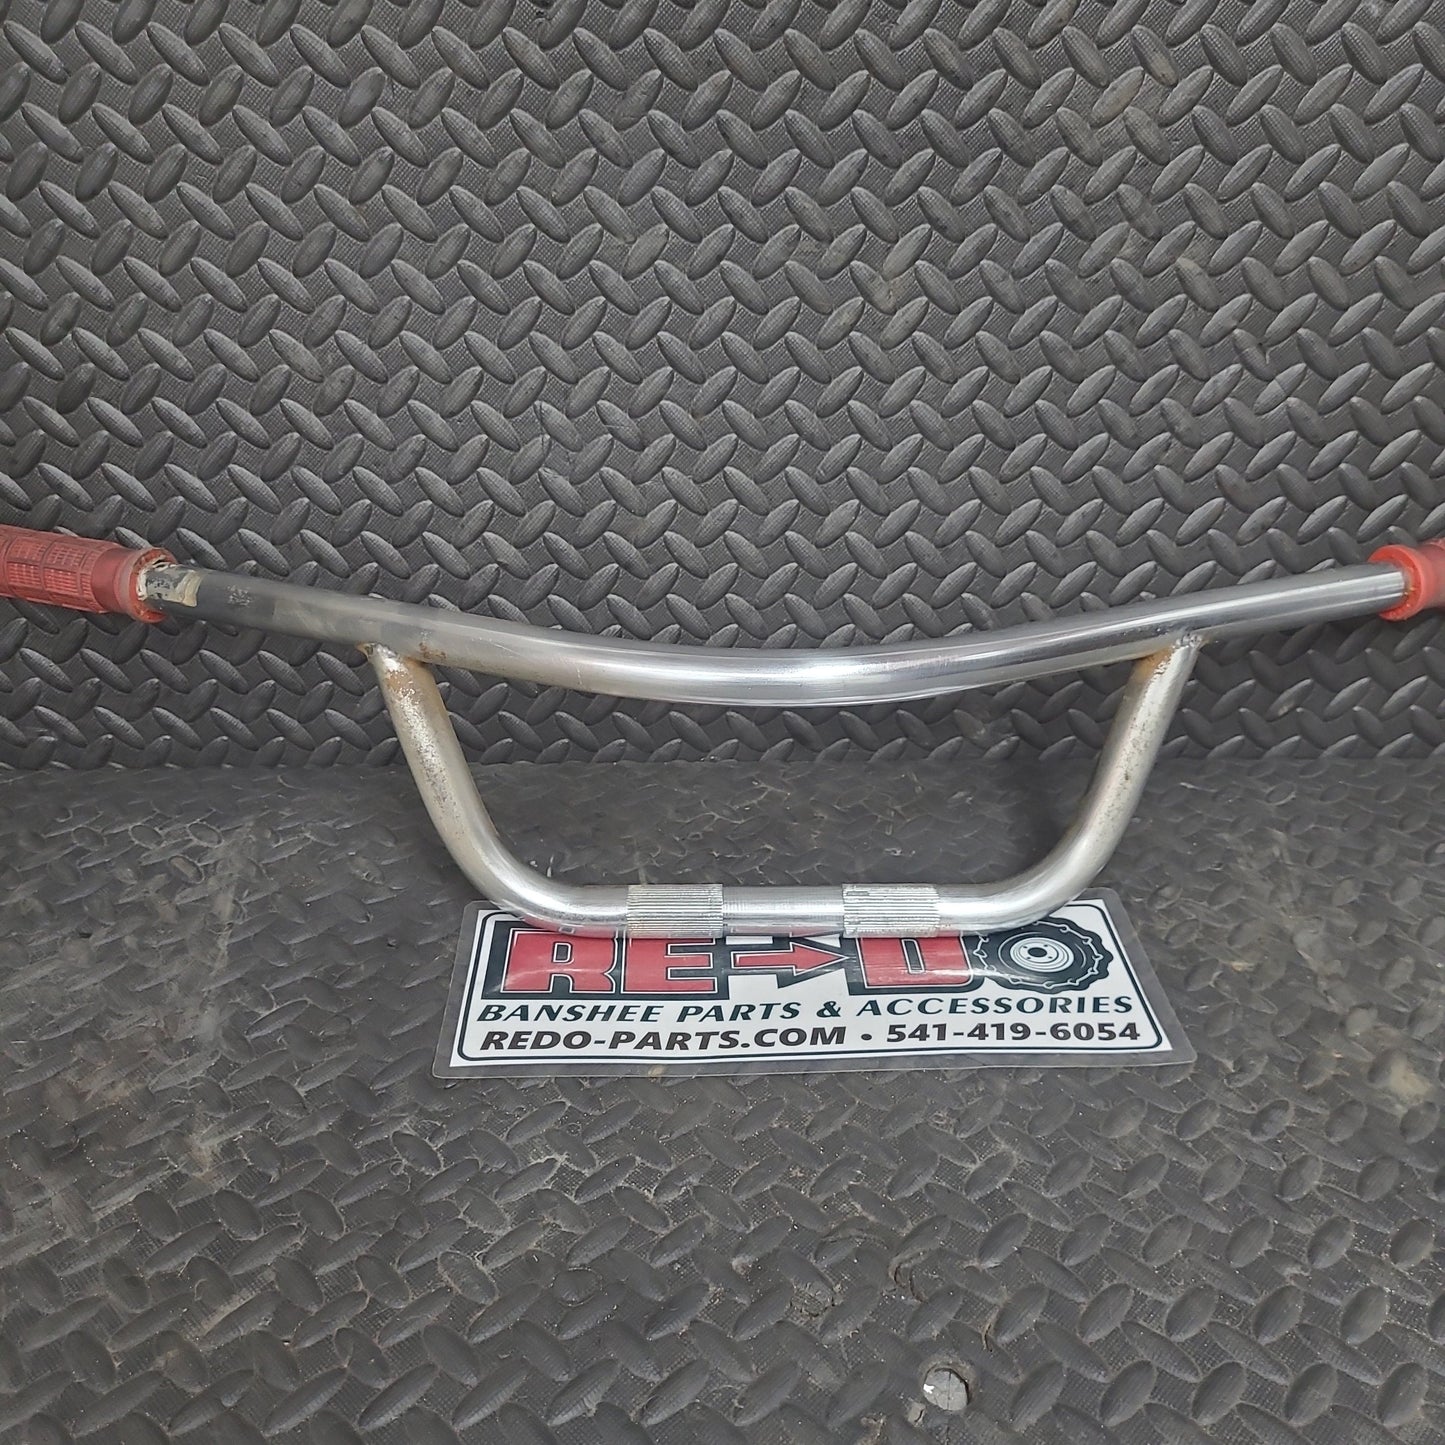 Vbar Handlebars with Red Grips *USED*